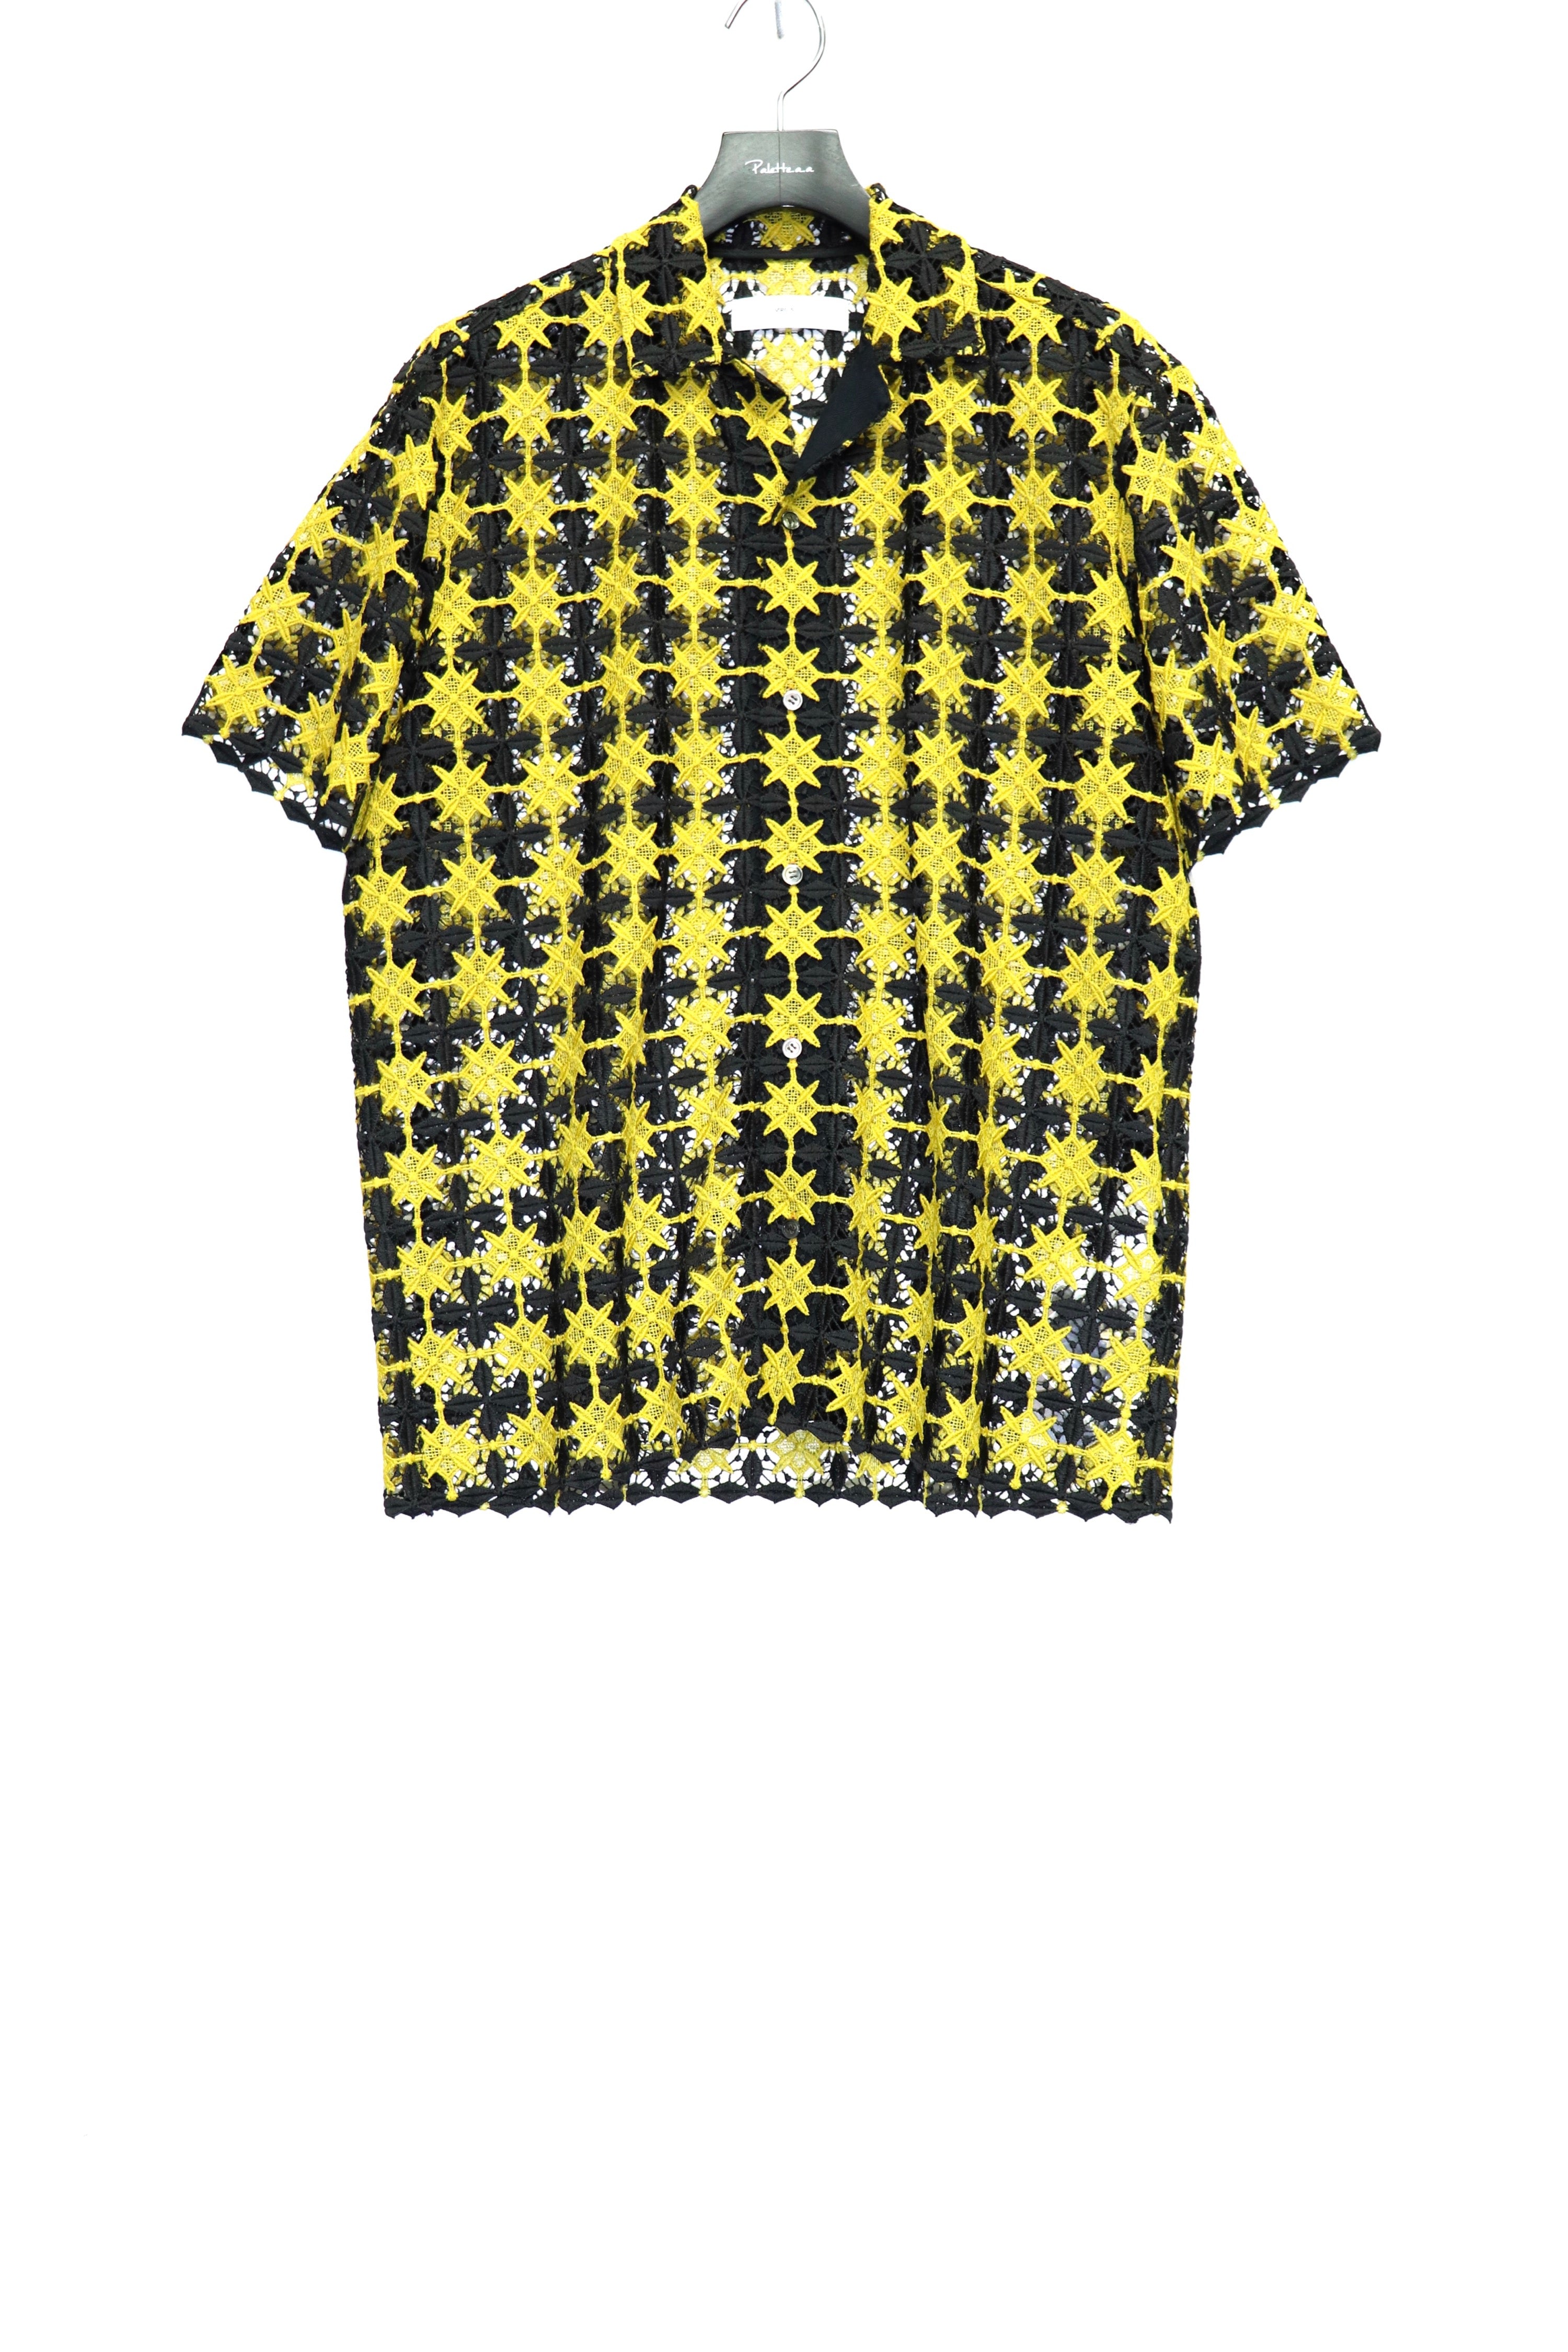 Toga Virilis (Toga Villy Lease) Lace Shirt Color Yellow mail order